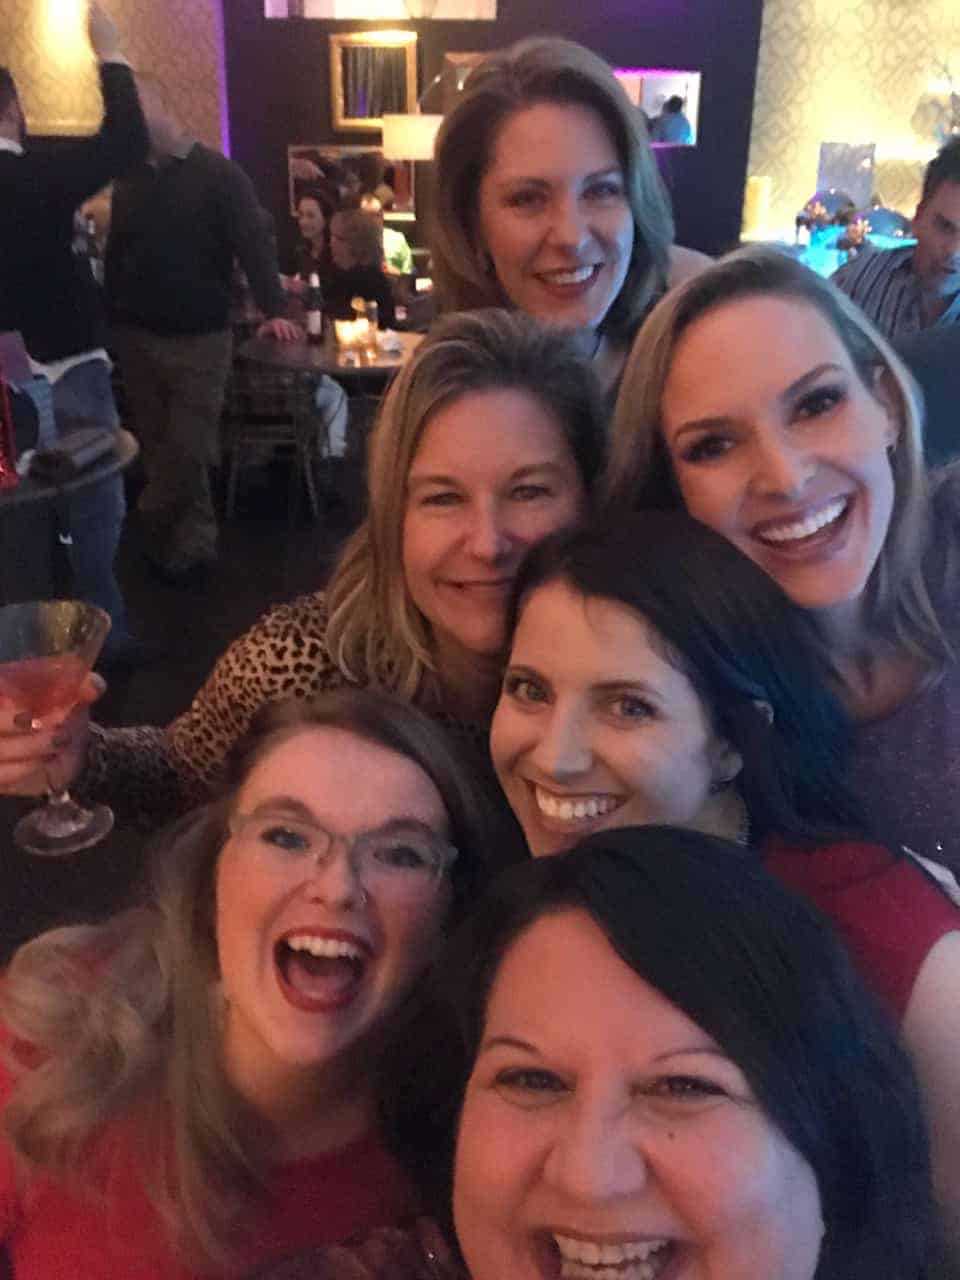 GPM Christmas party 2018 - Golden Proportions Marketing